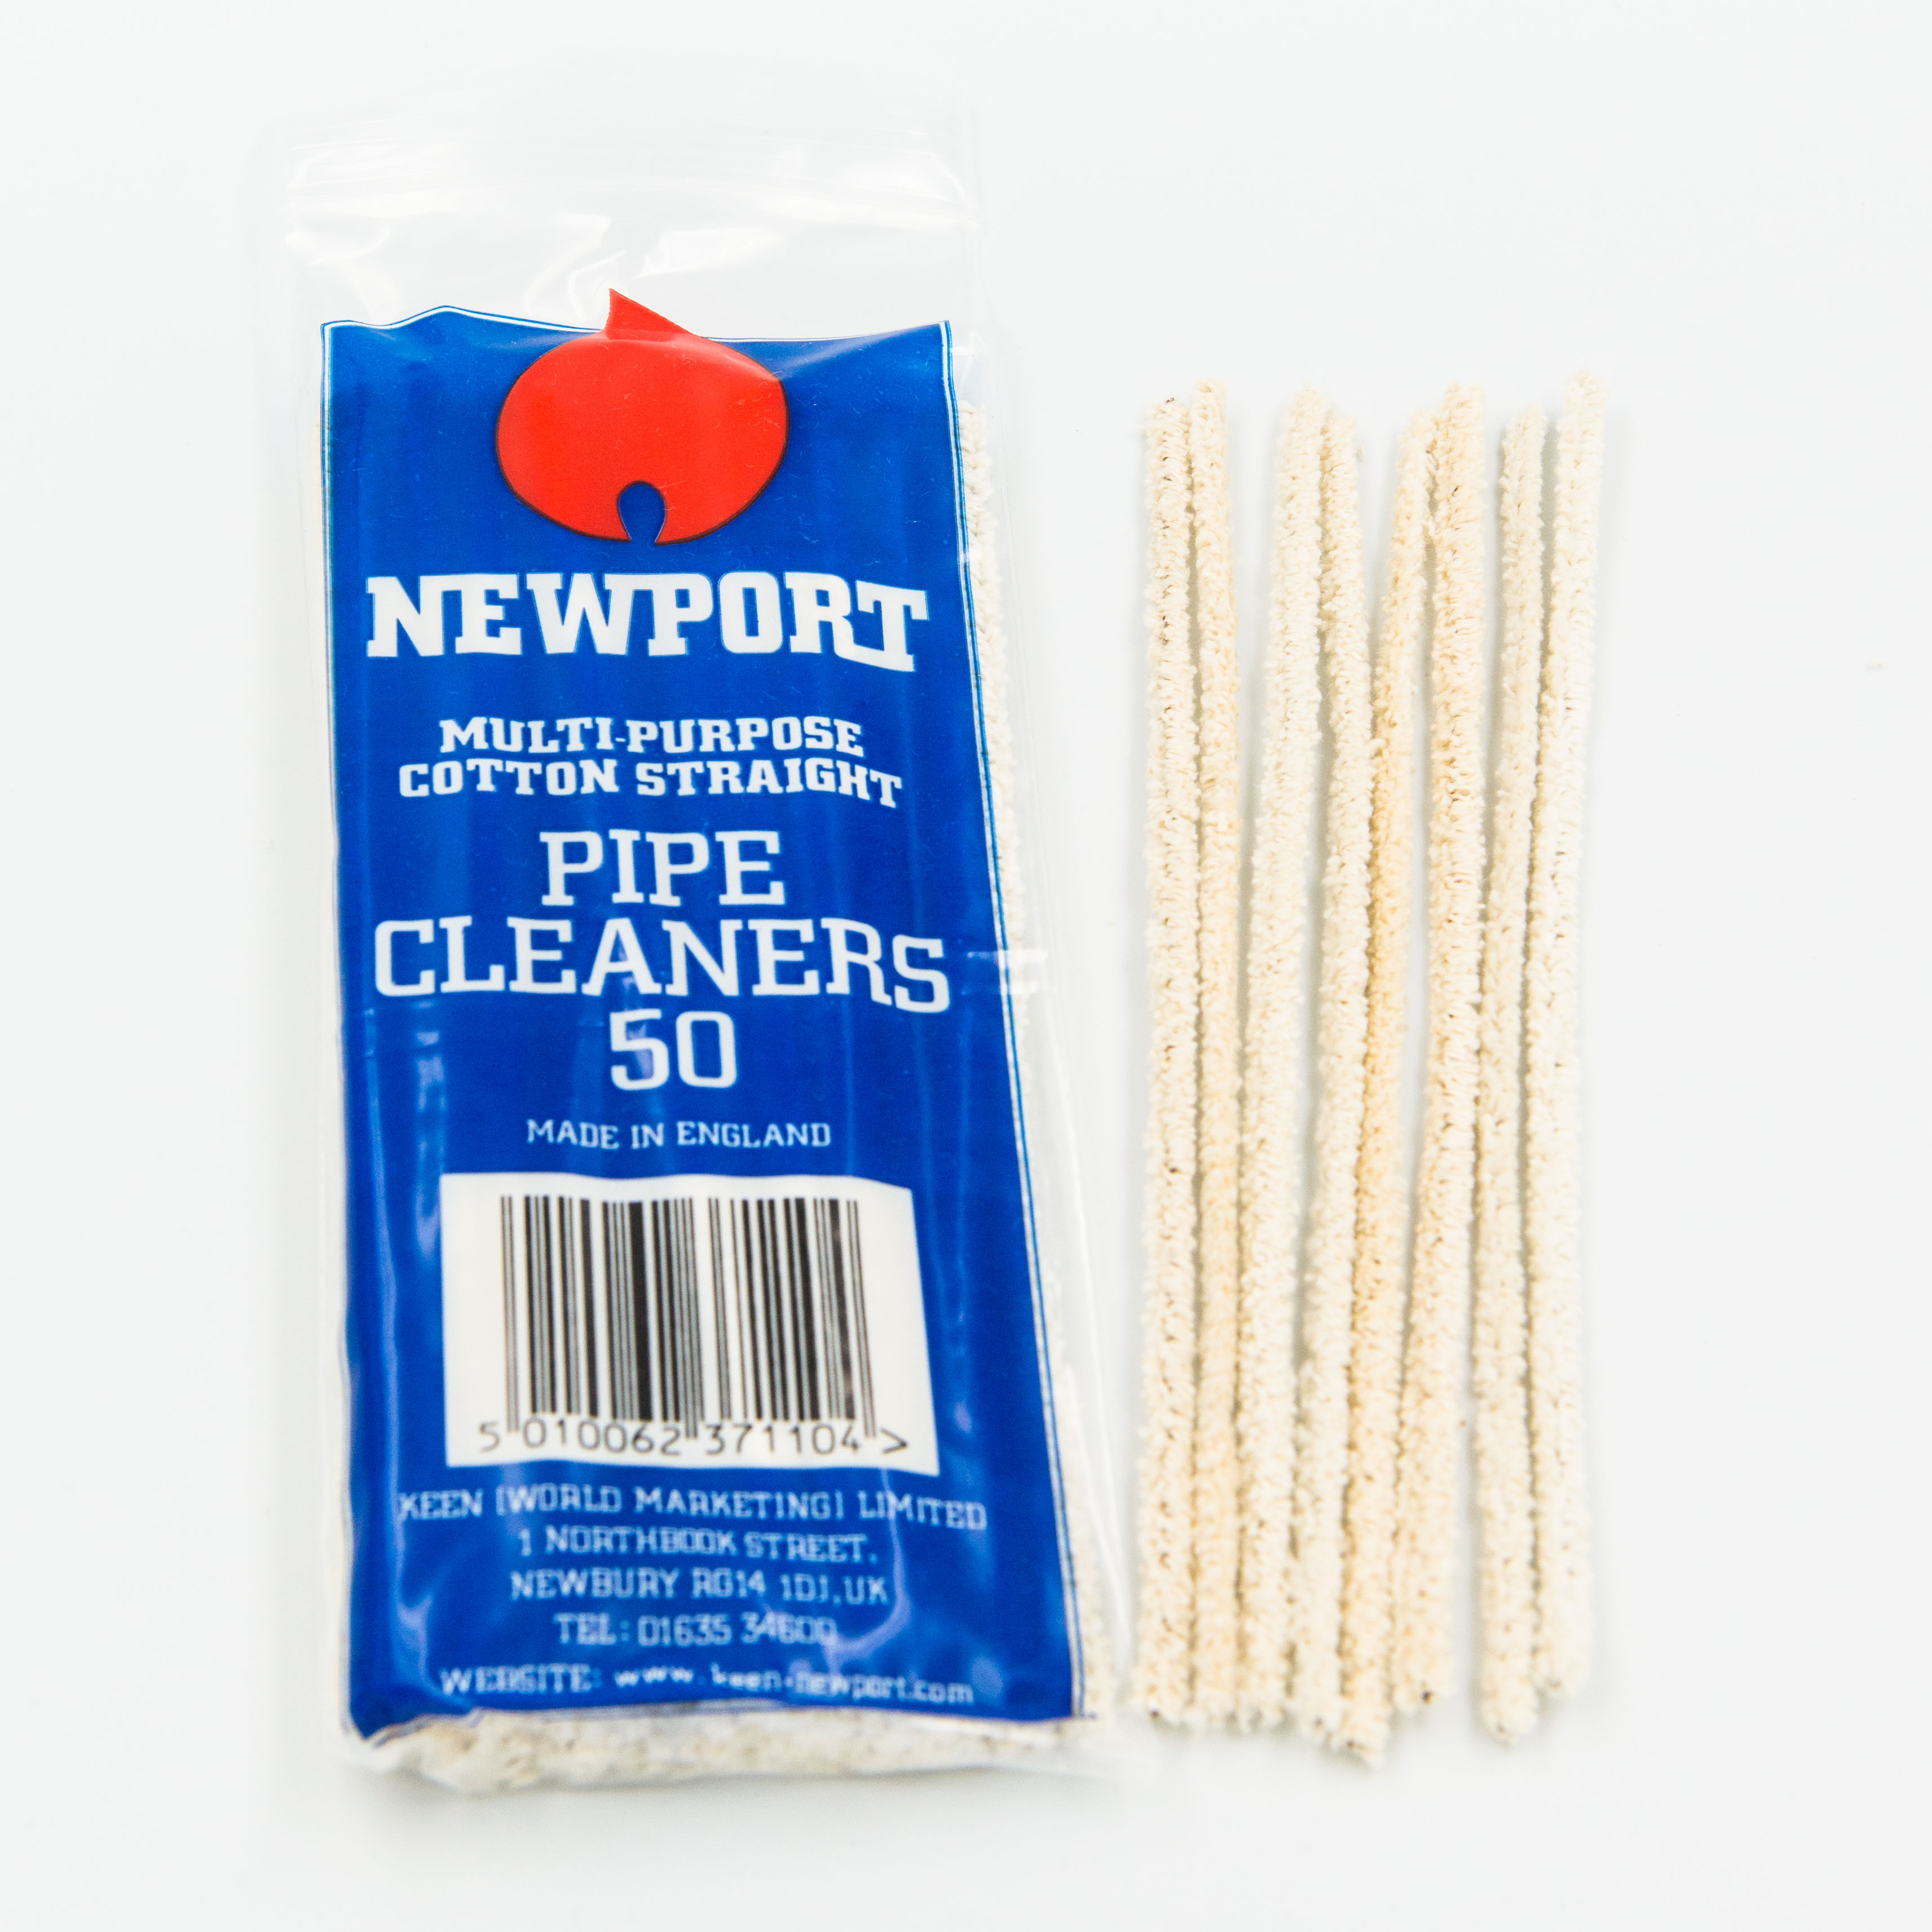 Finest Quality Ronson Pipe Cleaner Bleach White Natural Cotton 25 Sticks a Pack 